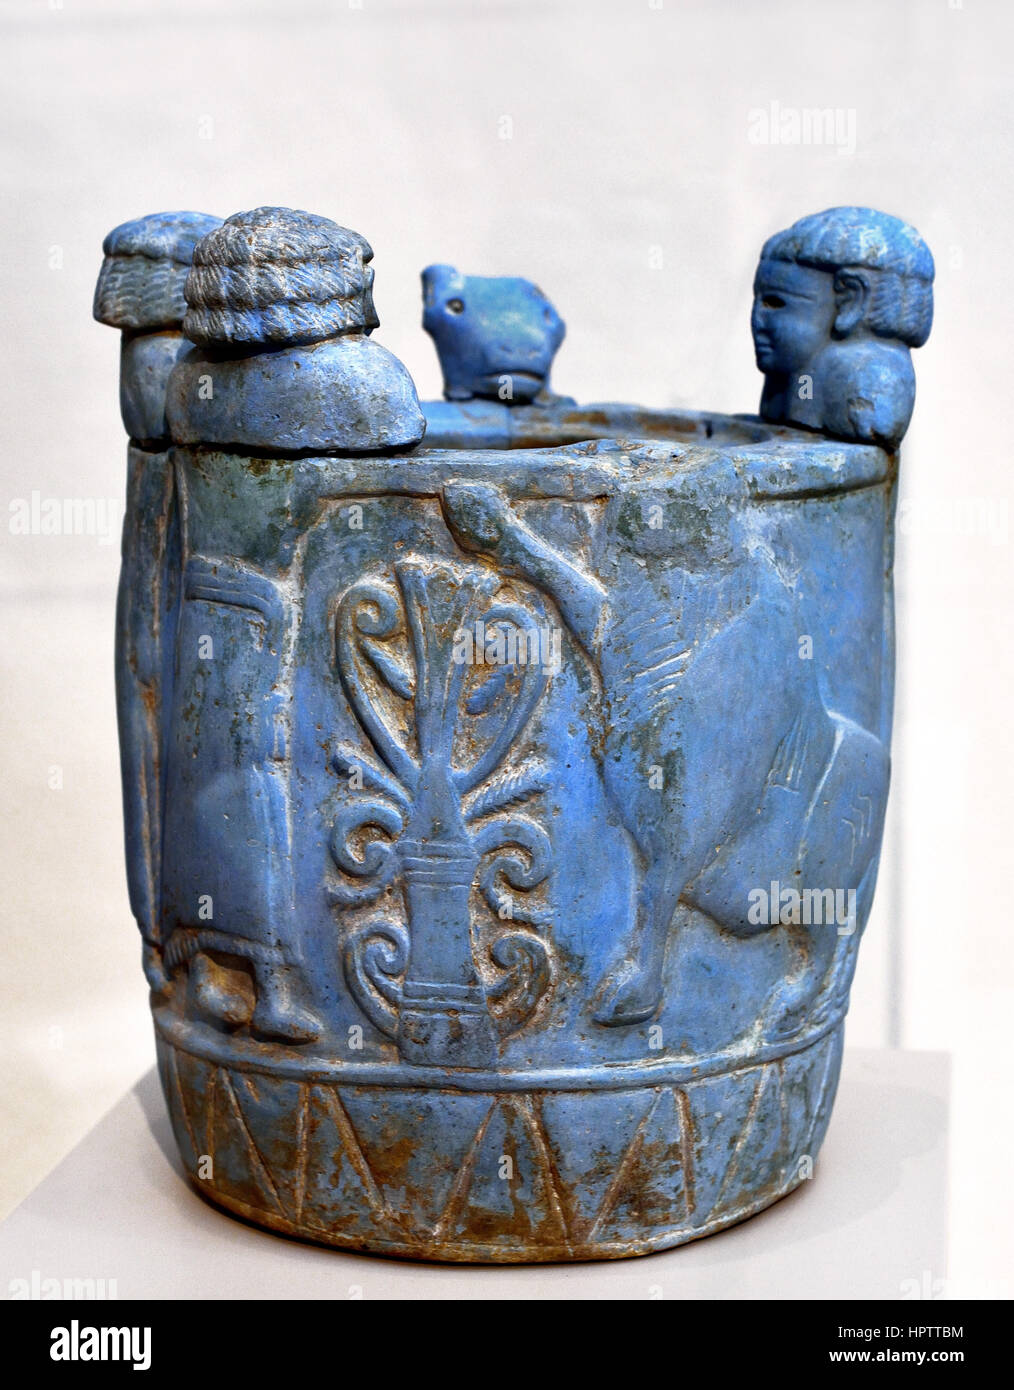 Faience Relief Pyxis made out of 'Egyptian blue'. Important to Italy from northern Syria. Produced 750-700 BC. Stock Photo